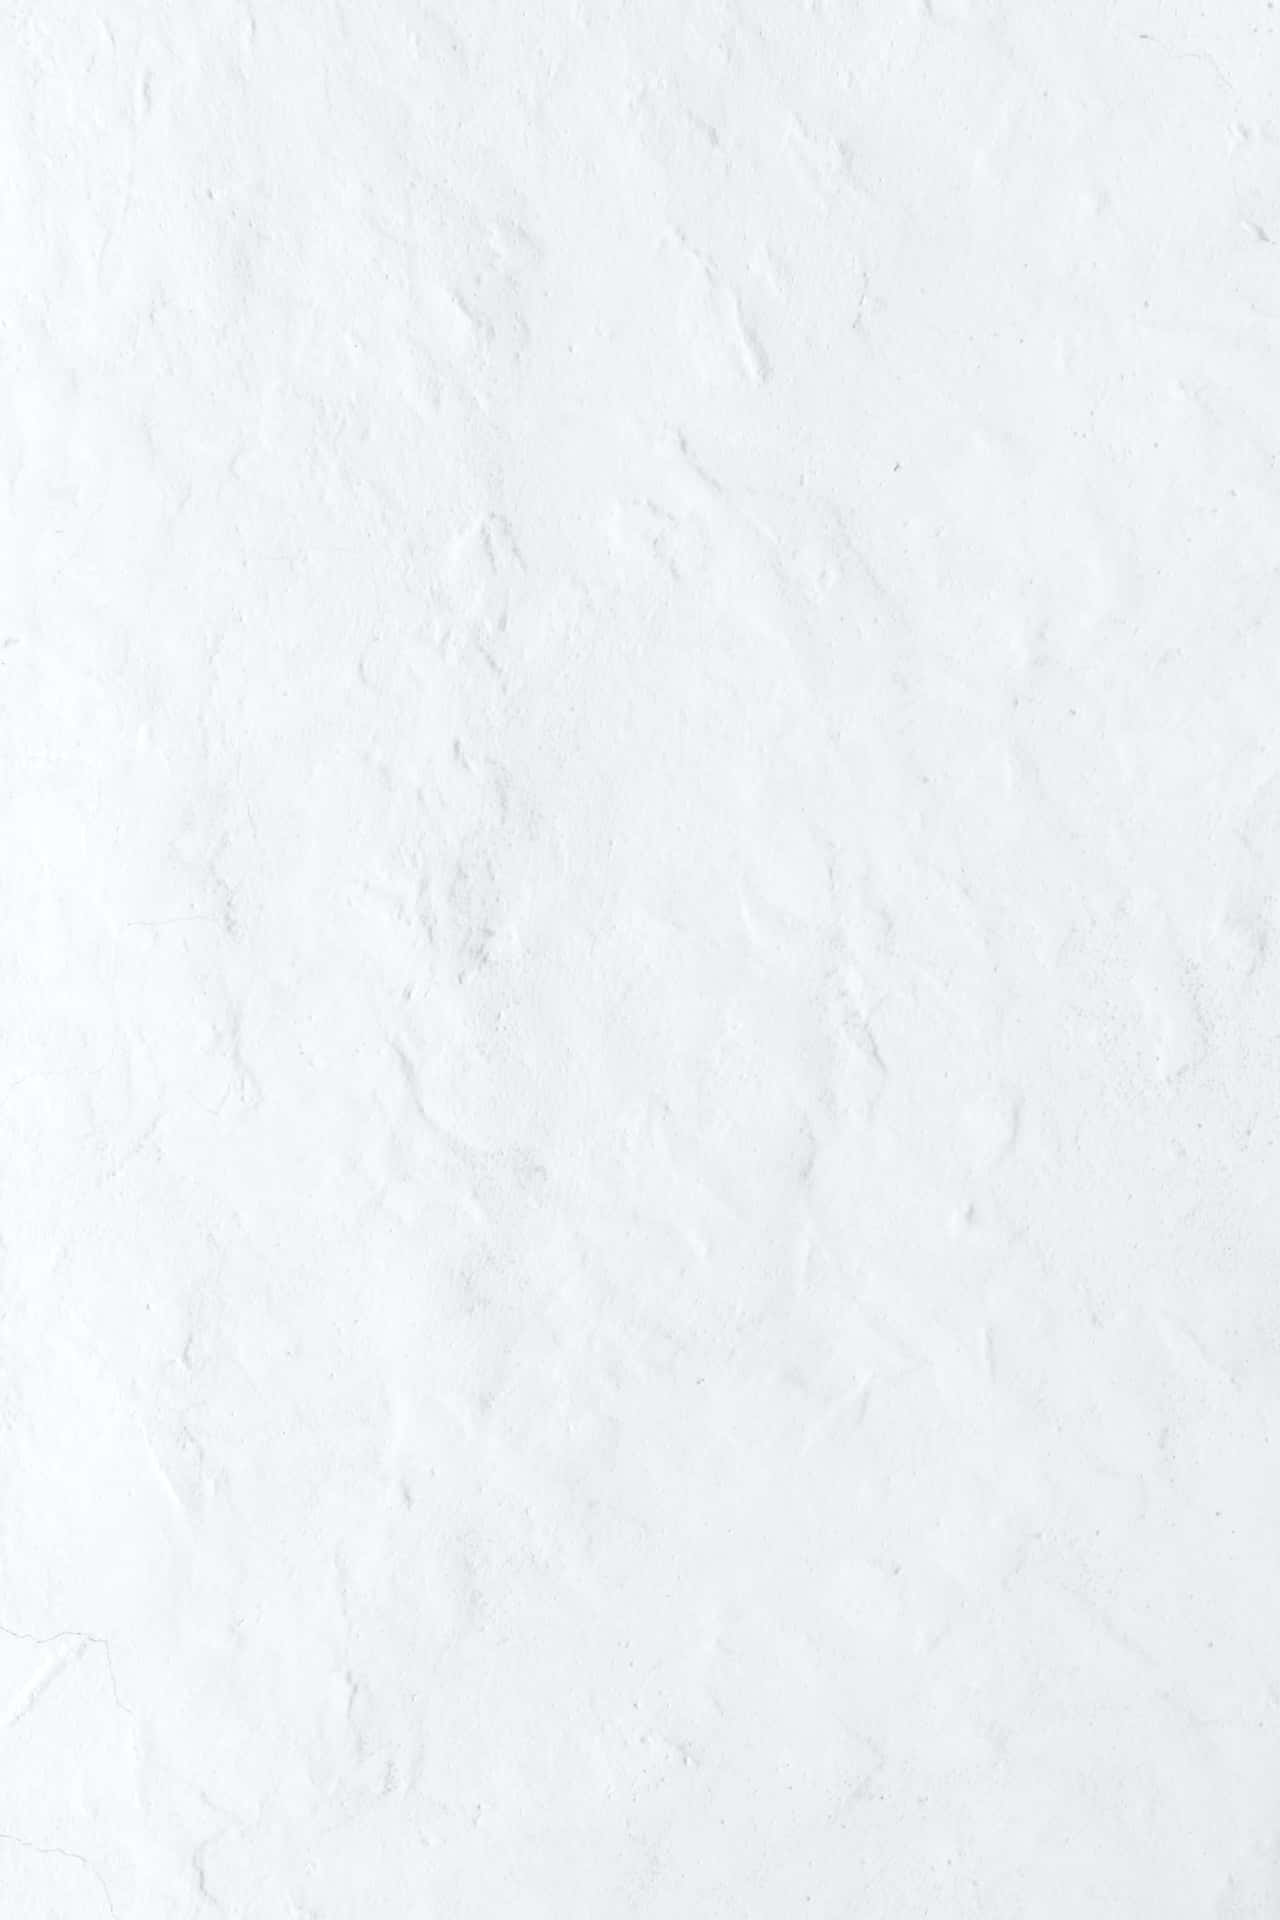 Clean, Crisp, White Wall Background